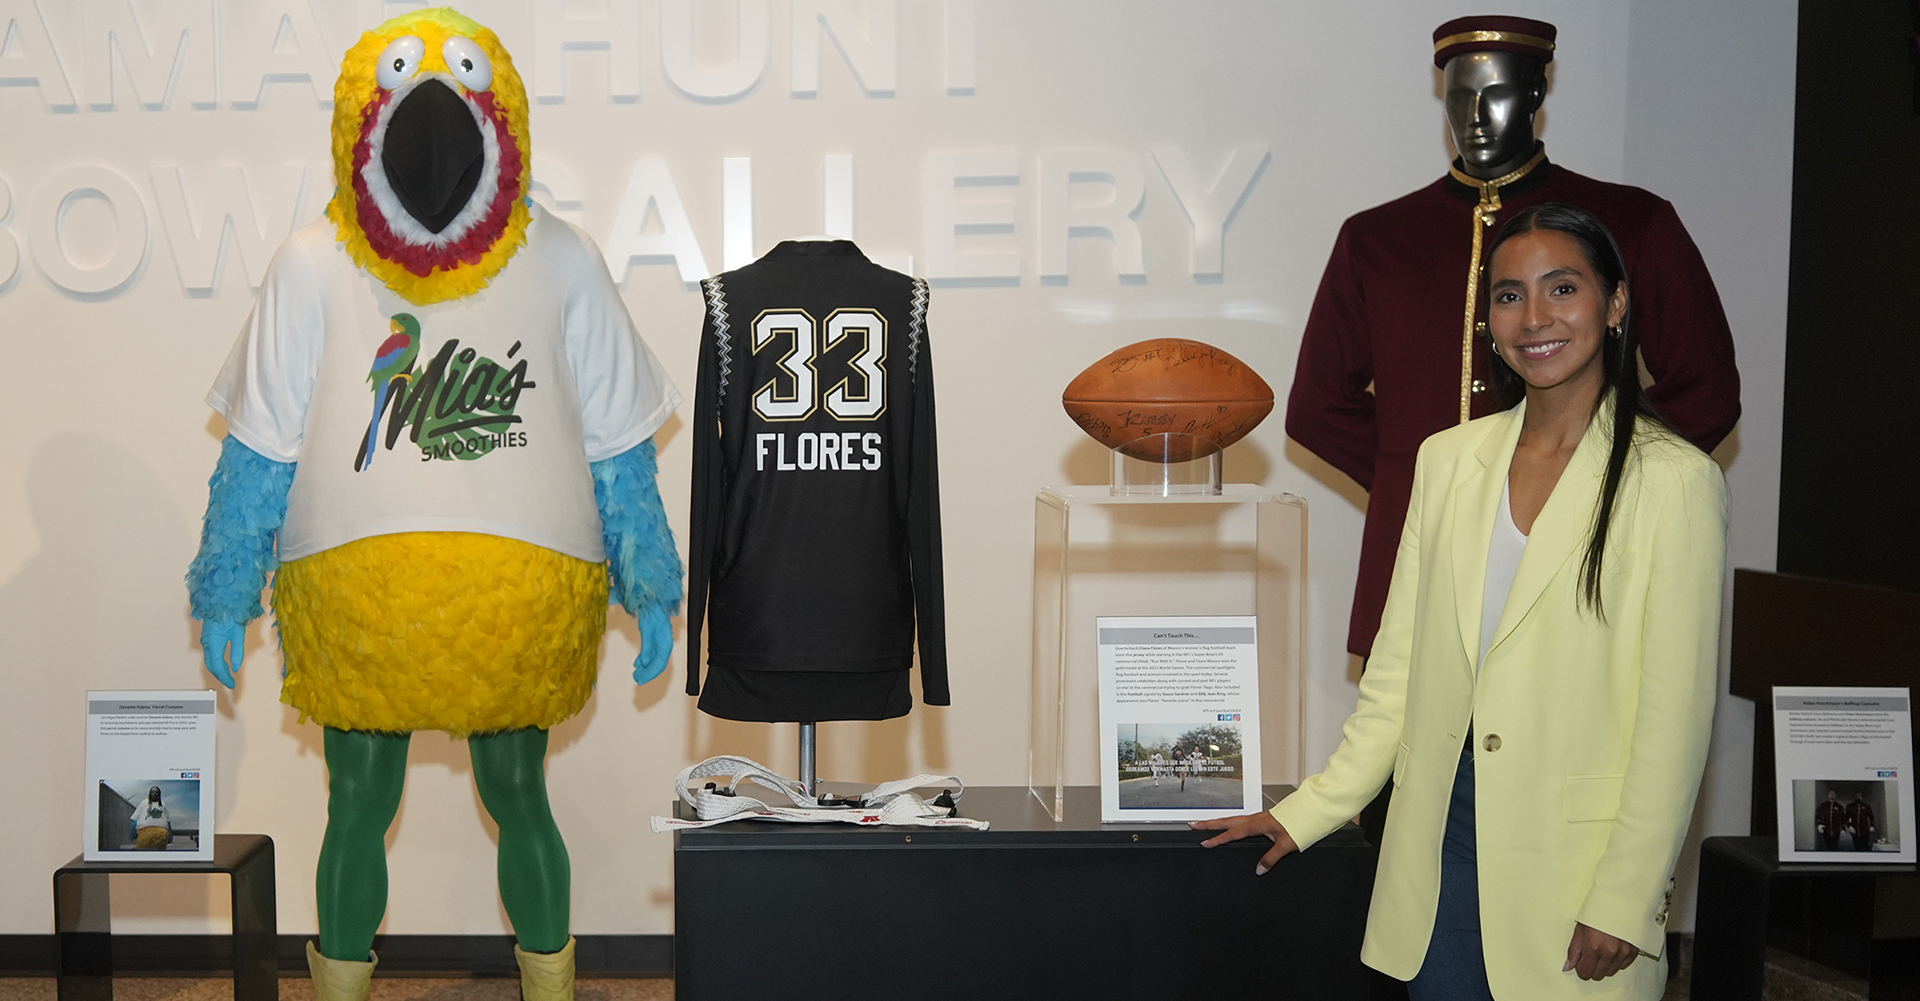 Flag football star Diana Flores was the first Flag football player with artifacts in the Pro Football Hall of Fame.